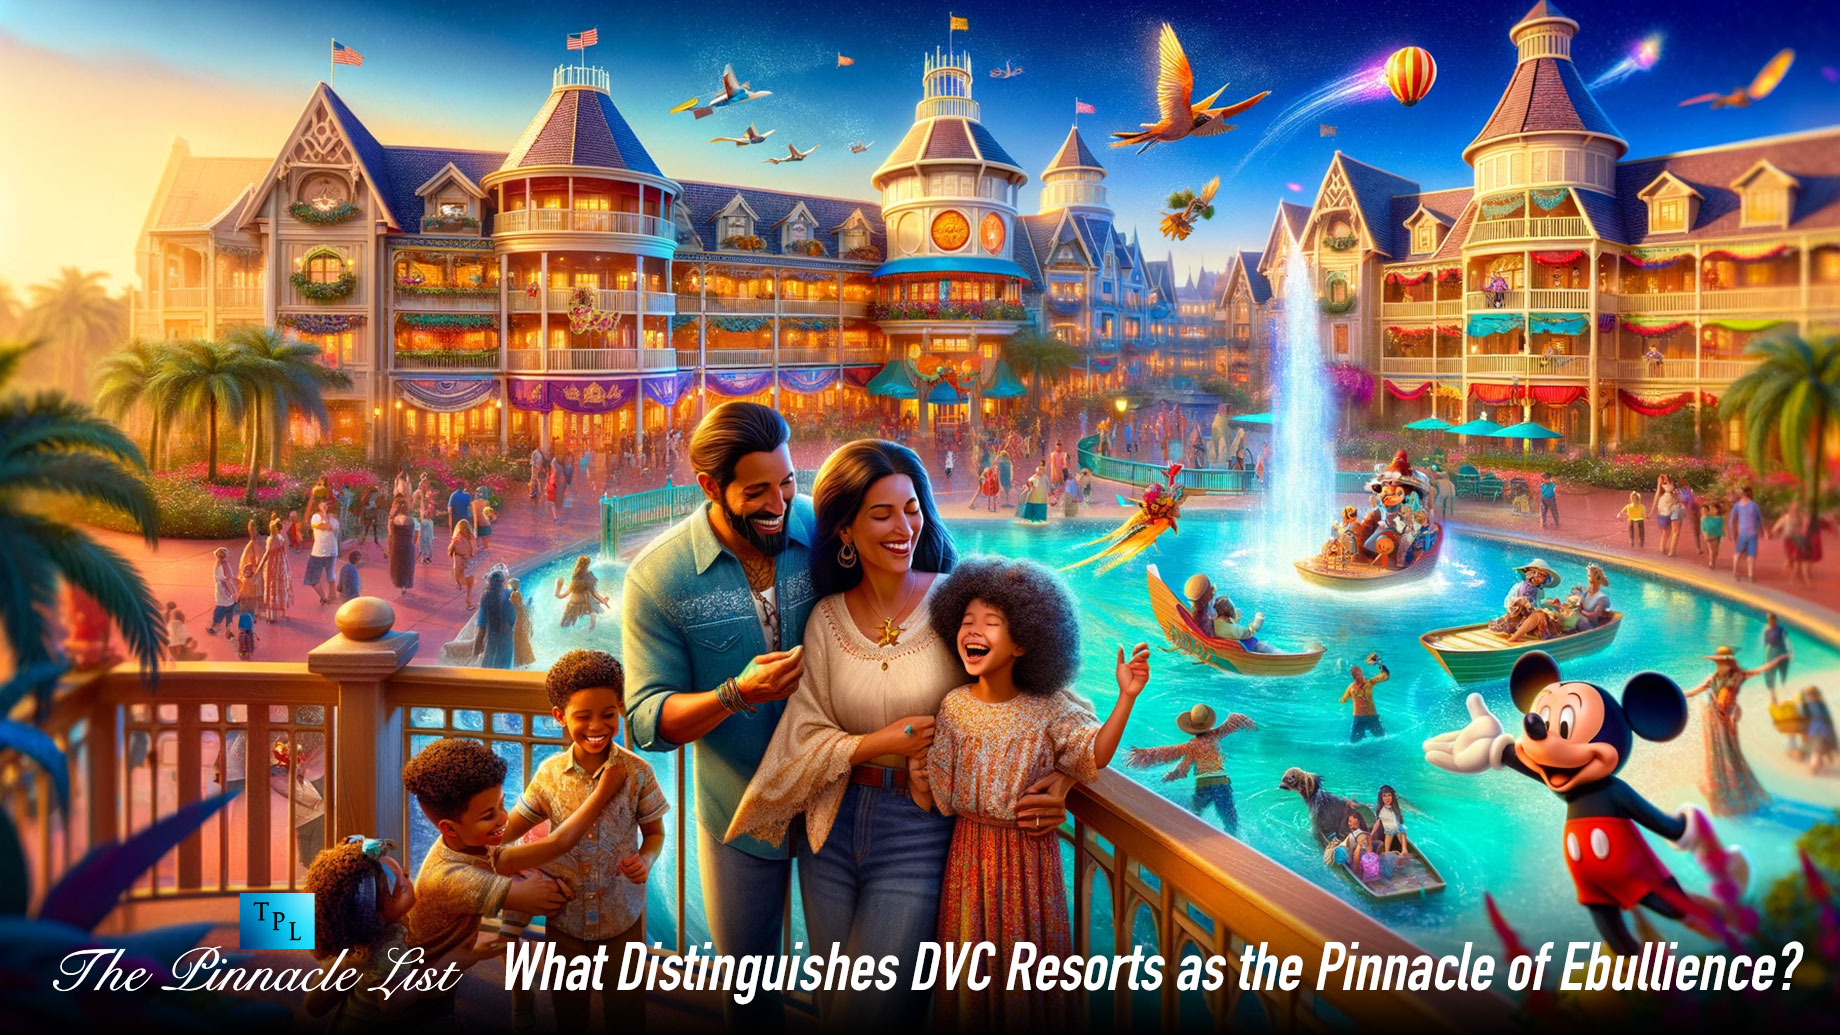 What Distinguishes DVC Resorts as the Pinnacle of Ebullience?